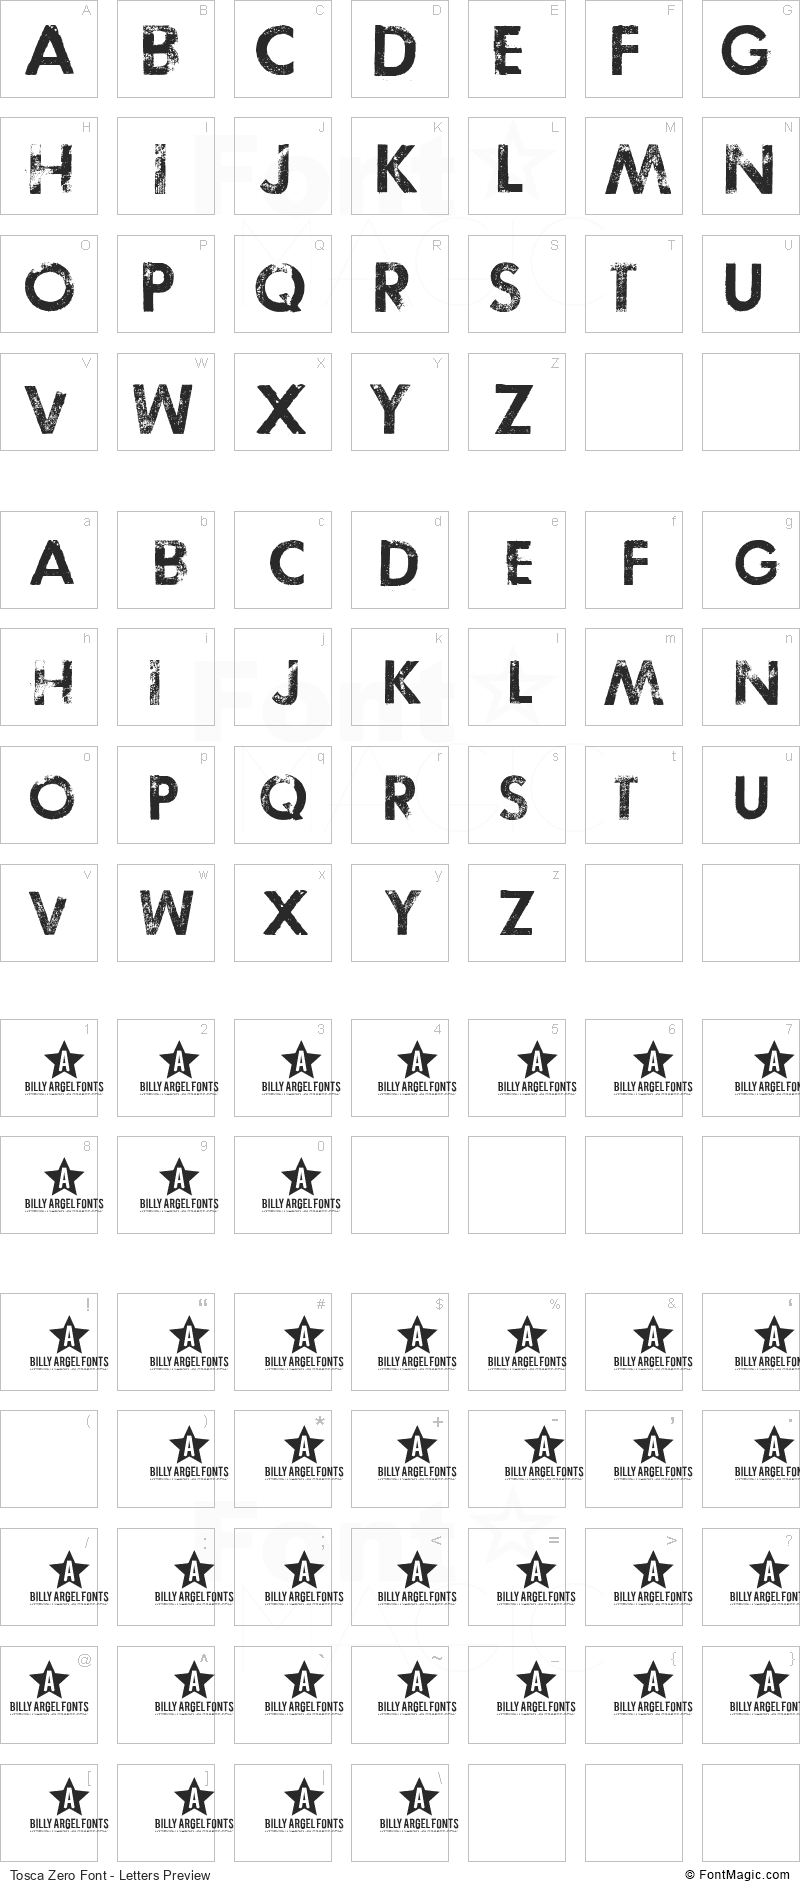 Tosca Zero Font - All Latters Preview Chart